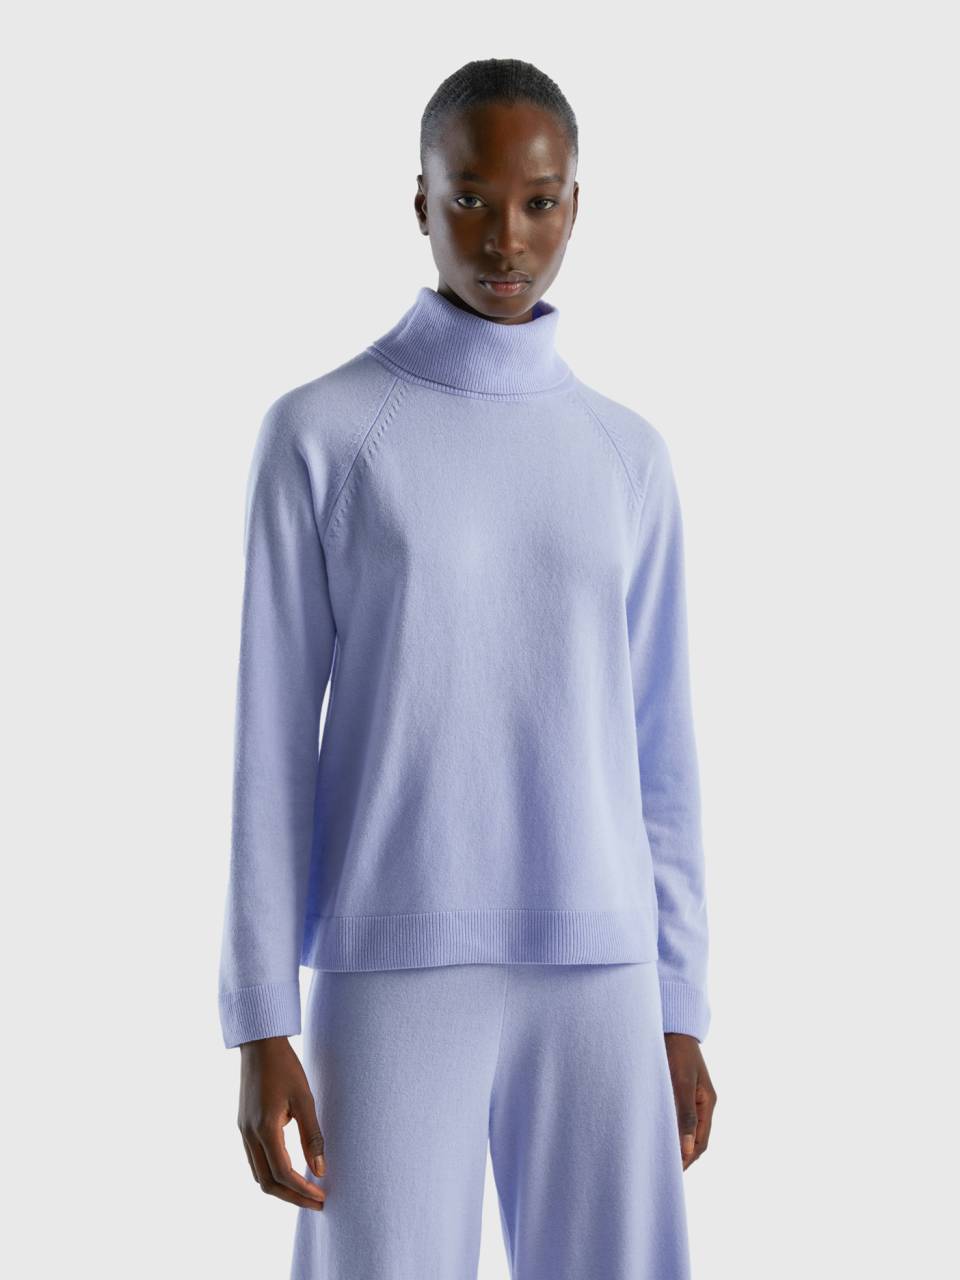 Benetton Light blue turtleneck in wool and cashmere blend. 1